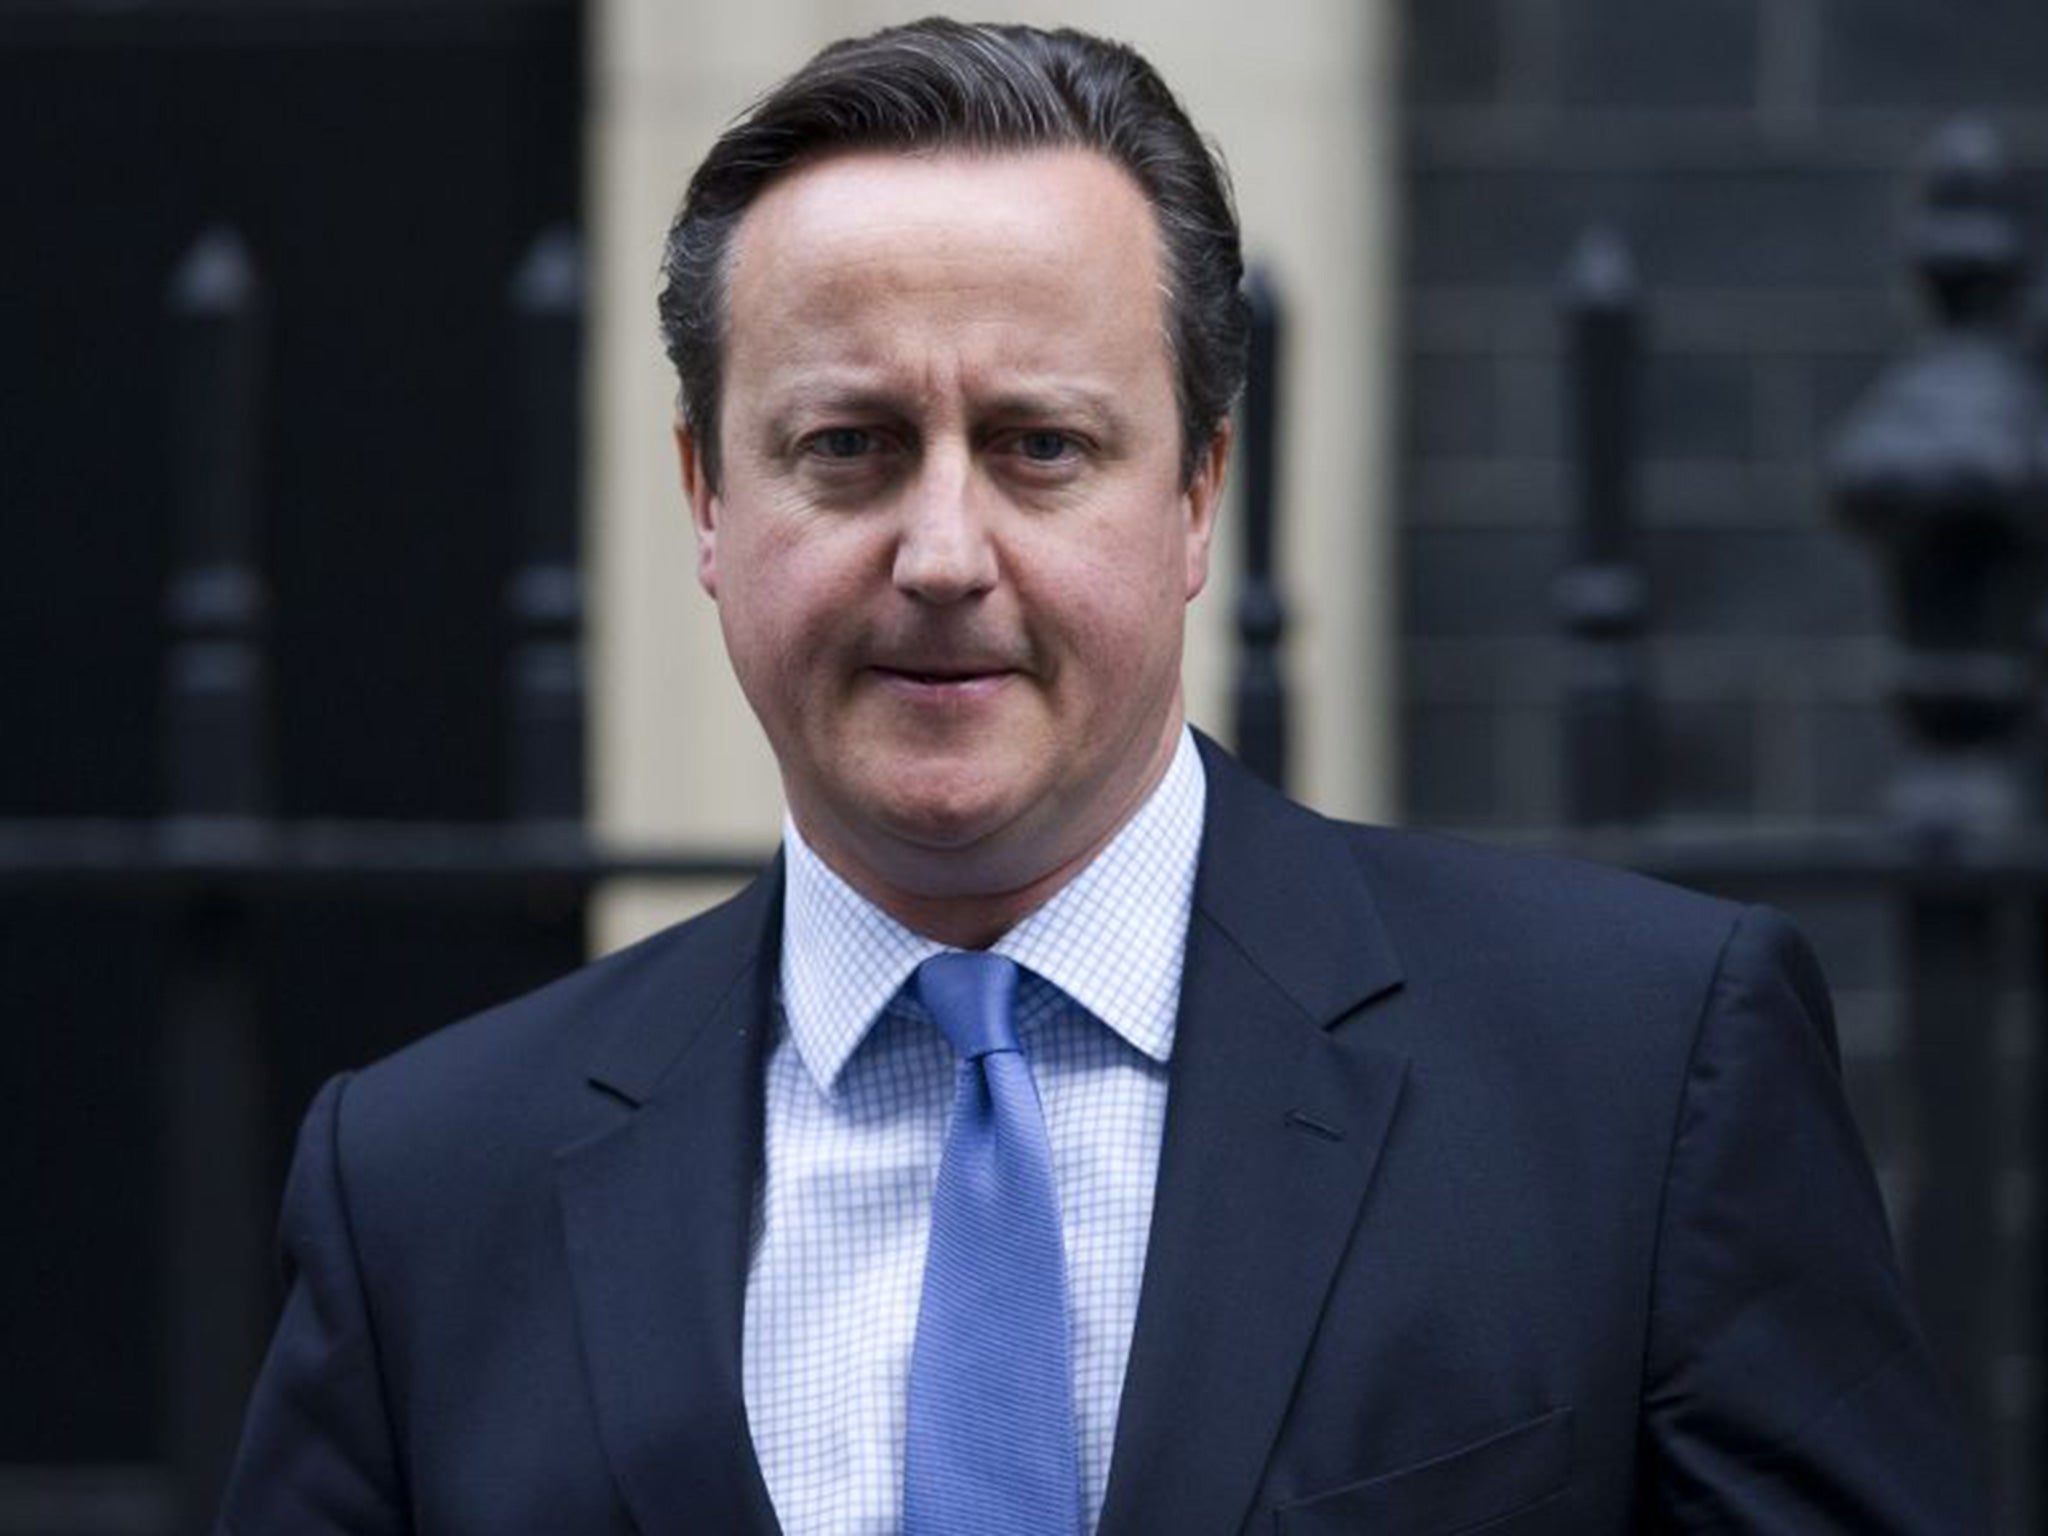 David Cameron will now hope to secure an agreement in February